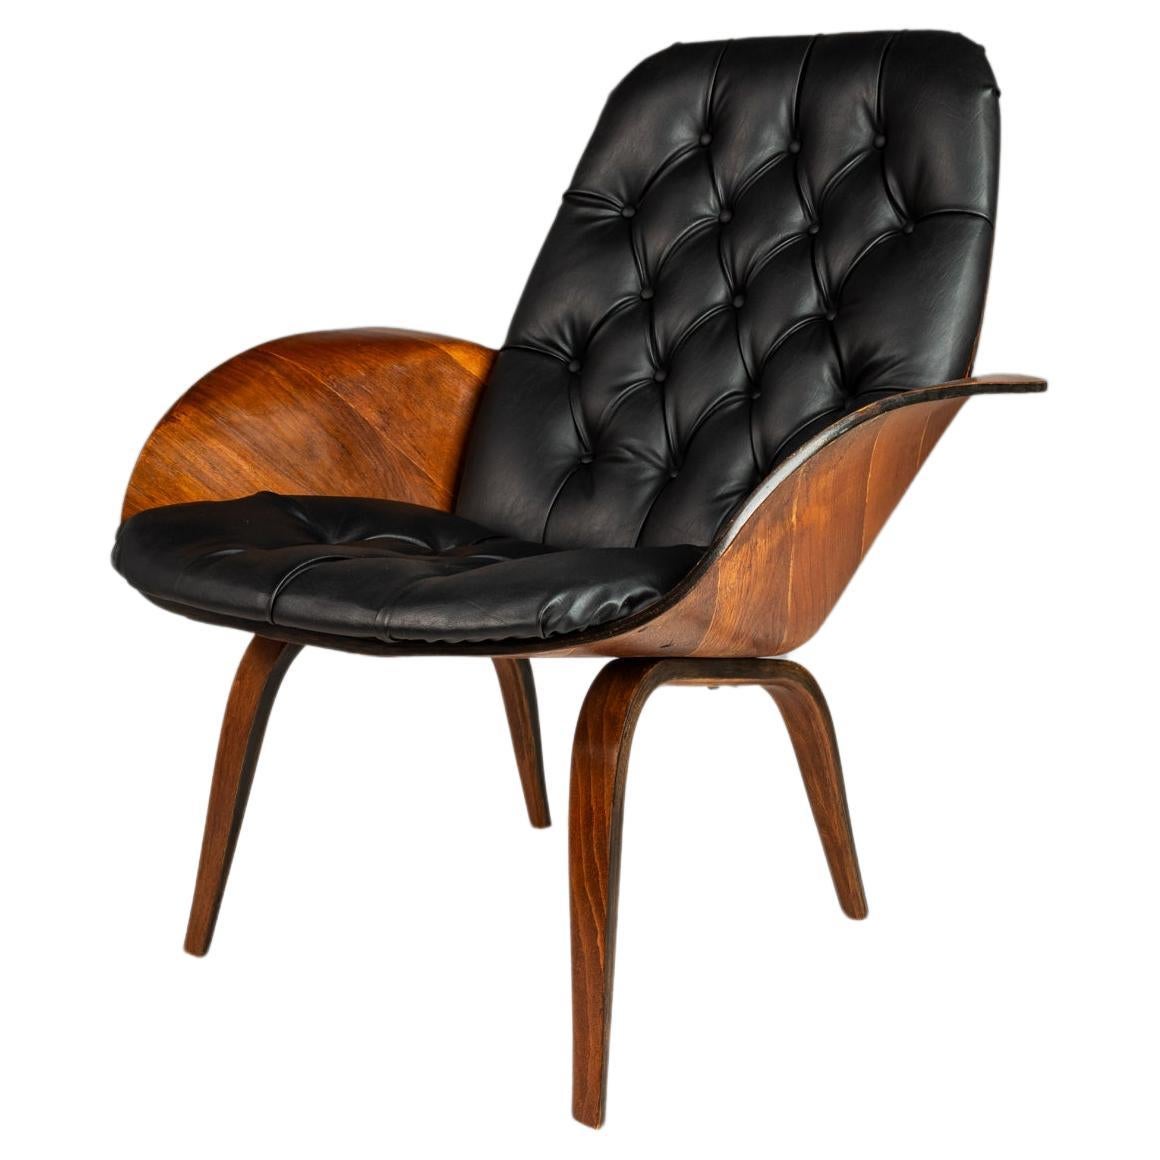 Mrs. Lounge Chair in Walnut & Vinyl by George Mulhauser for Plycraft, c. 1960s